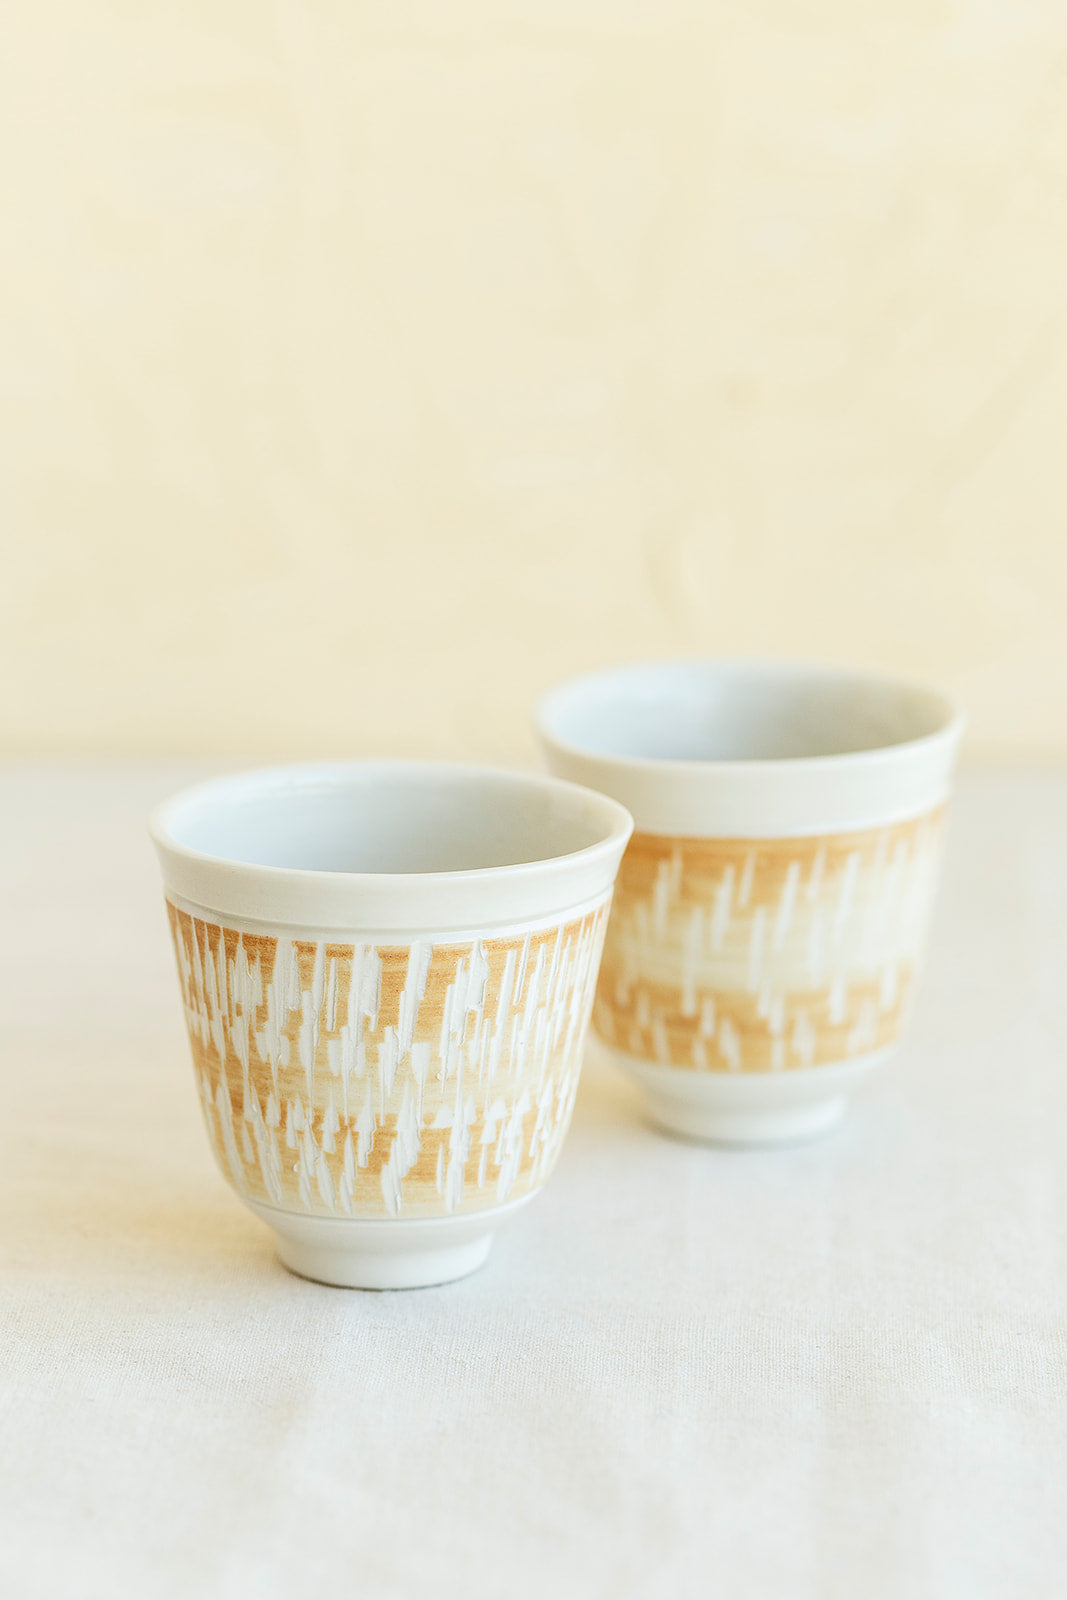 Ceramic cup - Porcelain & Terra Cotta cup with chattering marks